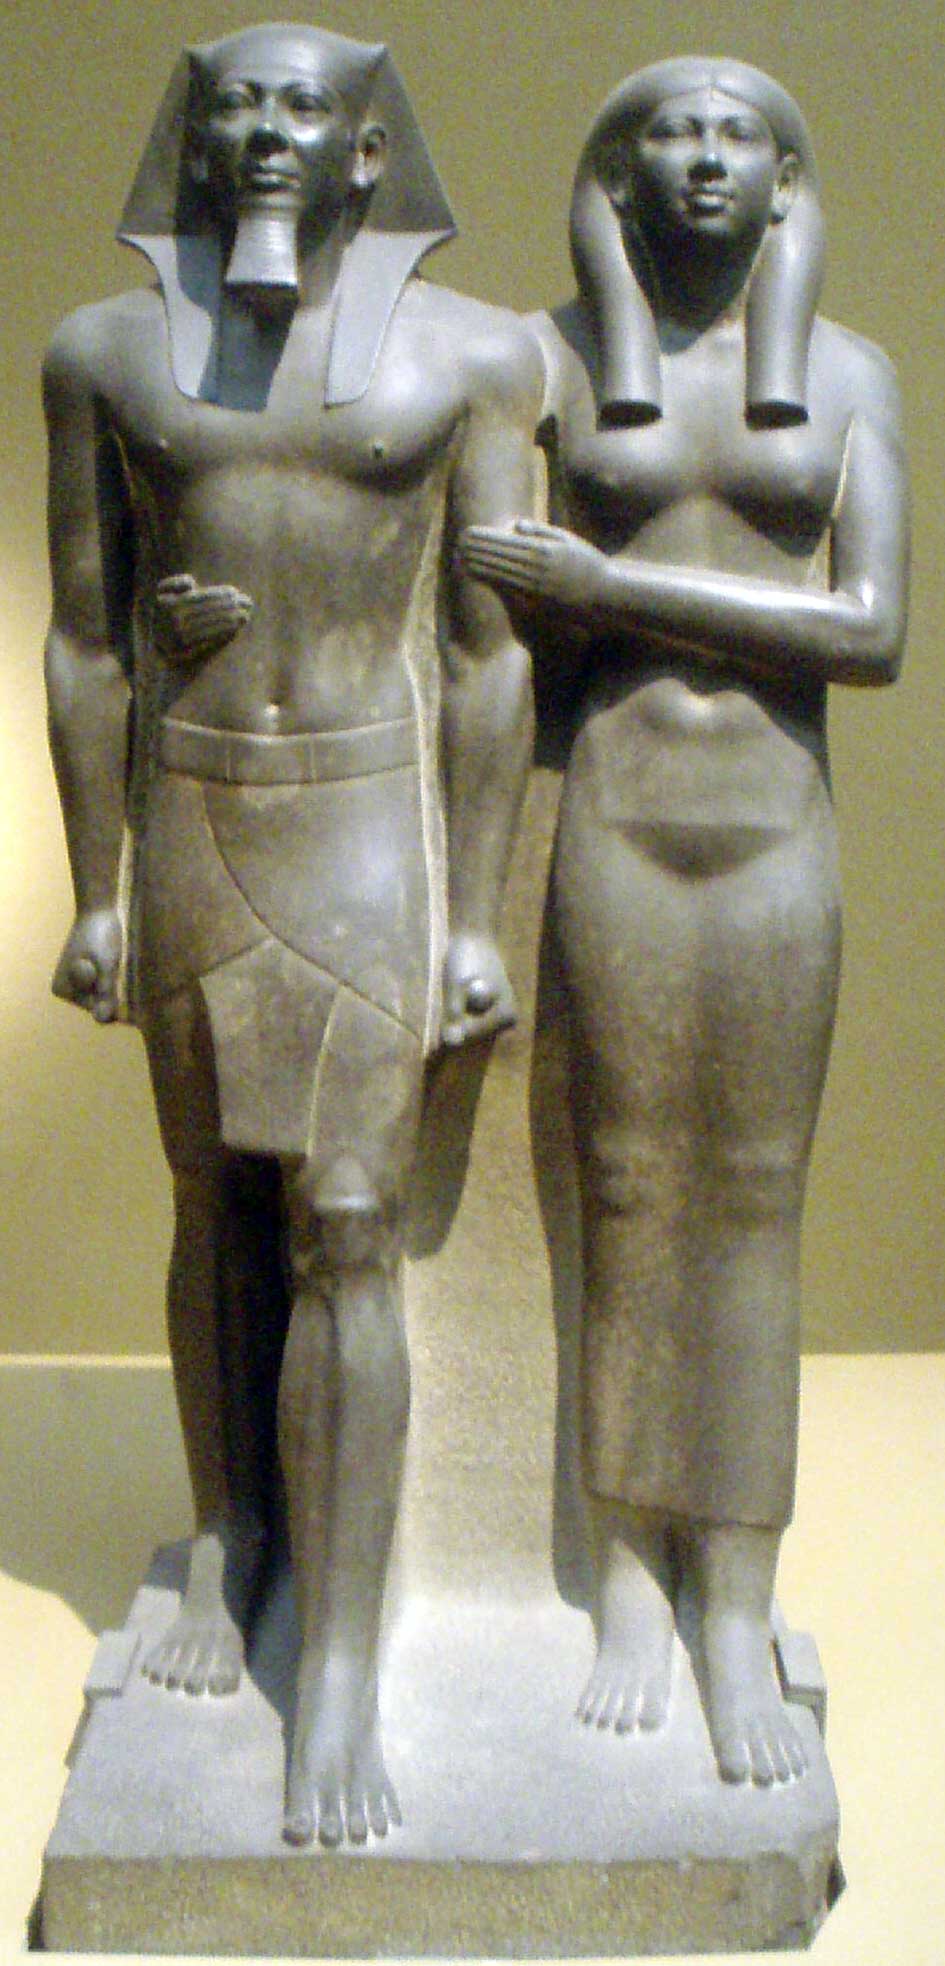 The image is that of the Egyptian king Menkaure and his queen, Khamerernebty II. Hewn from dark stone, both king and queen are stoic in appearance and possess ideal bodies. Although standing shoulder to shoulder, Menkaure's foot steps ahead of his wife to illustrate his superior position.